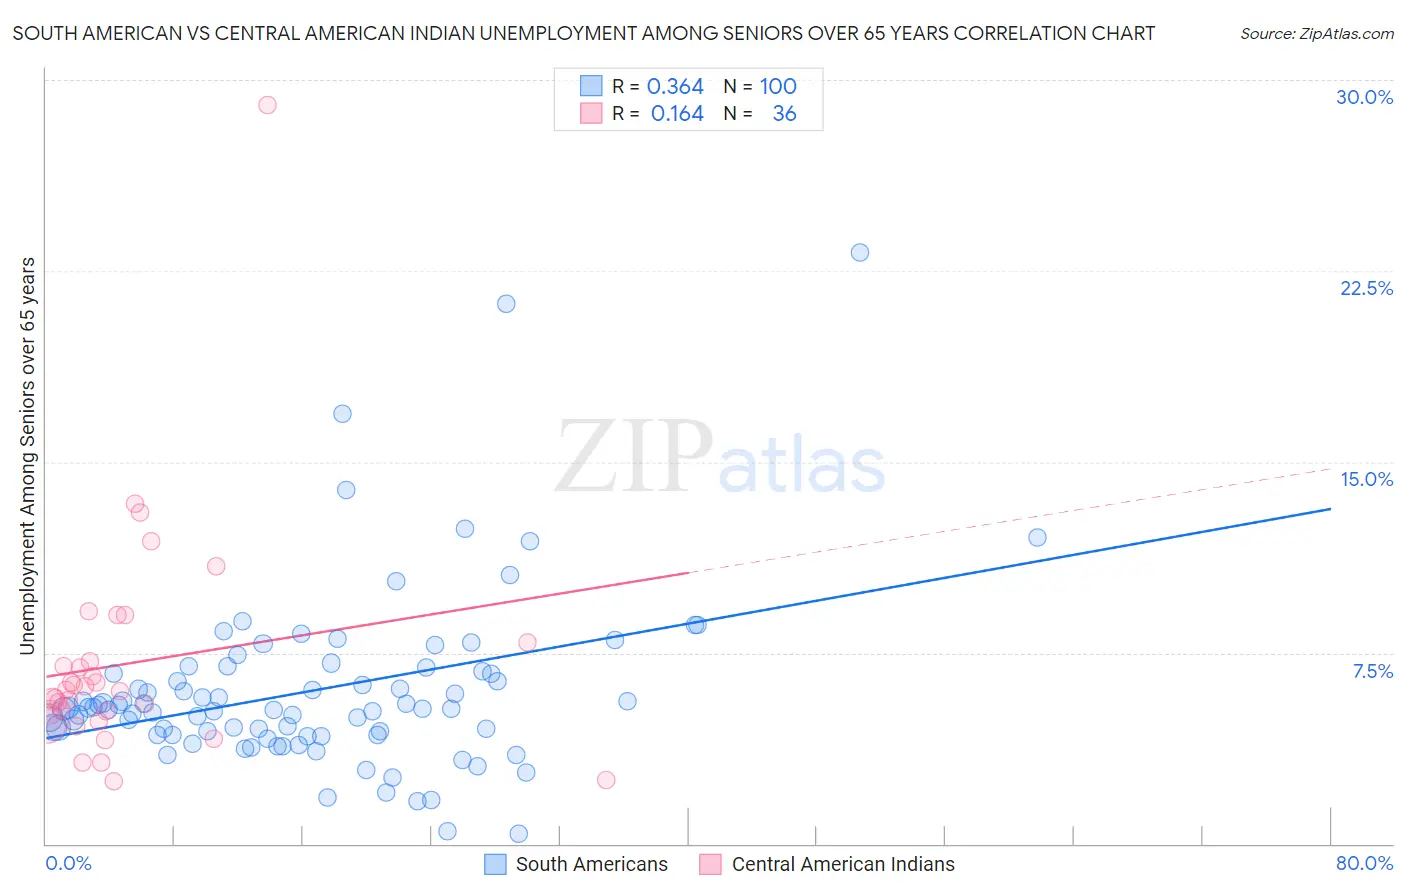 South American vs Central American Indian Unemployment Among Seniors over 65 years